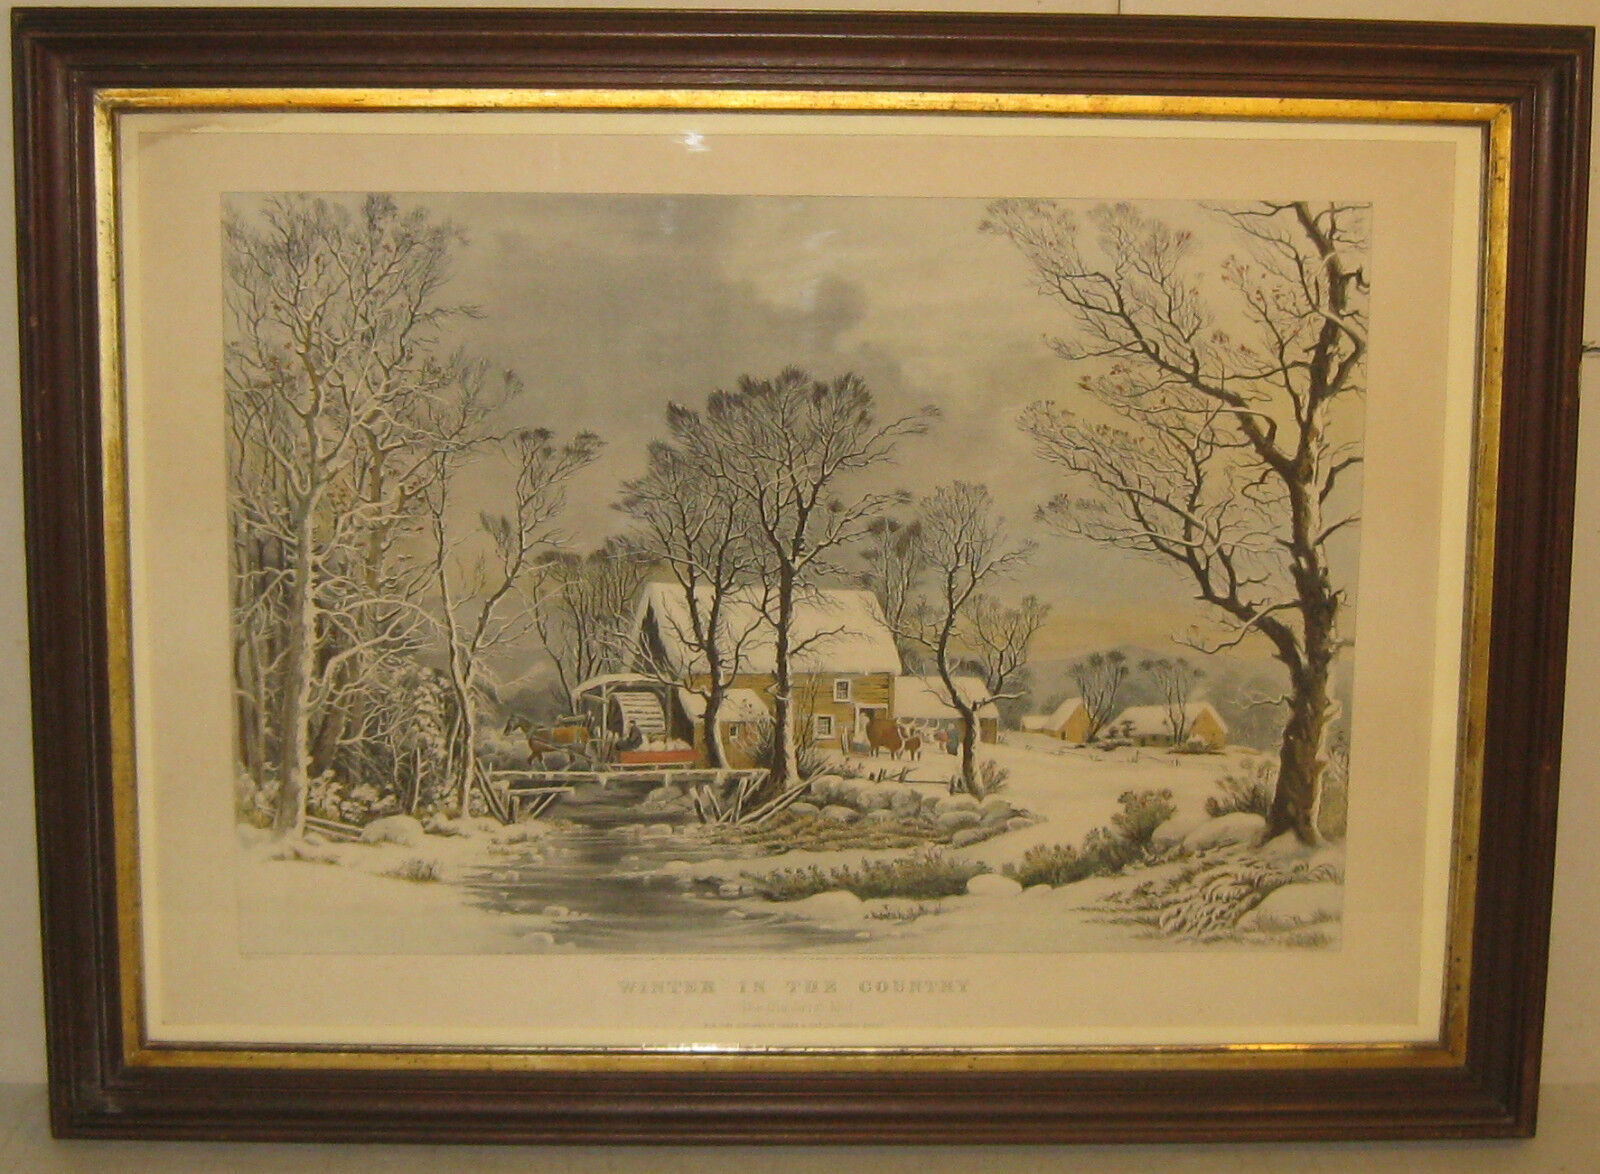 Vintage CURRIER & IVES Winter in the Country Old Grist Mill RESTRIKE Lithograph